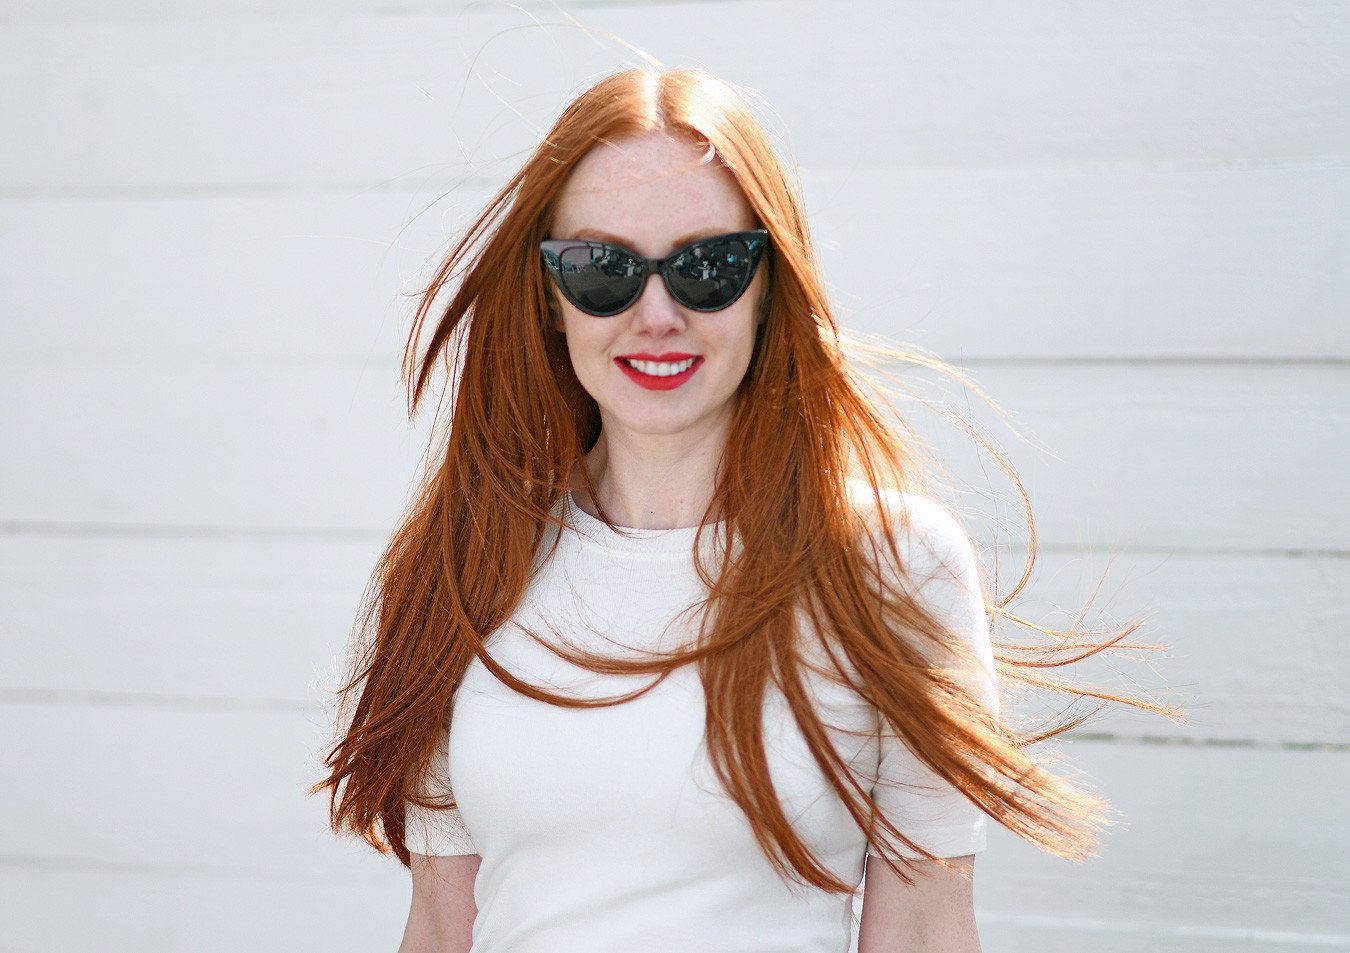 Great Lengths hair extensions in natural red hair